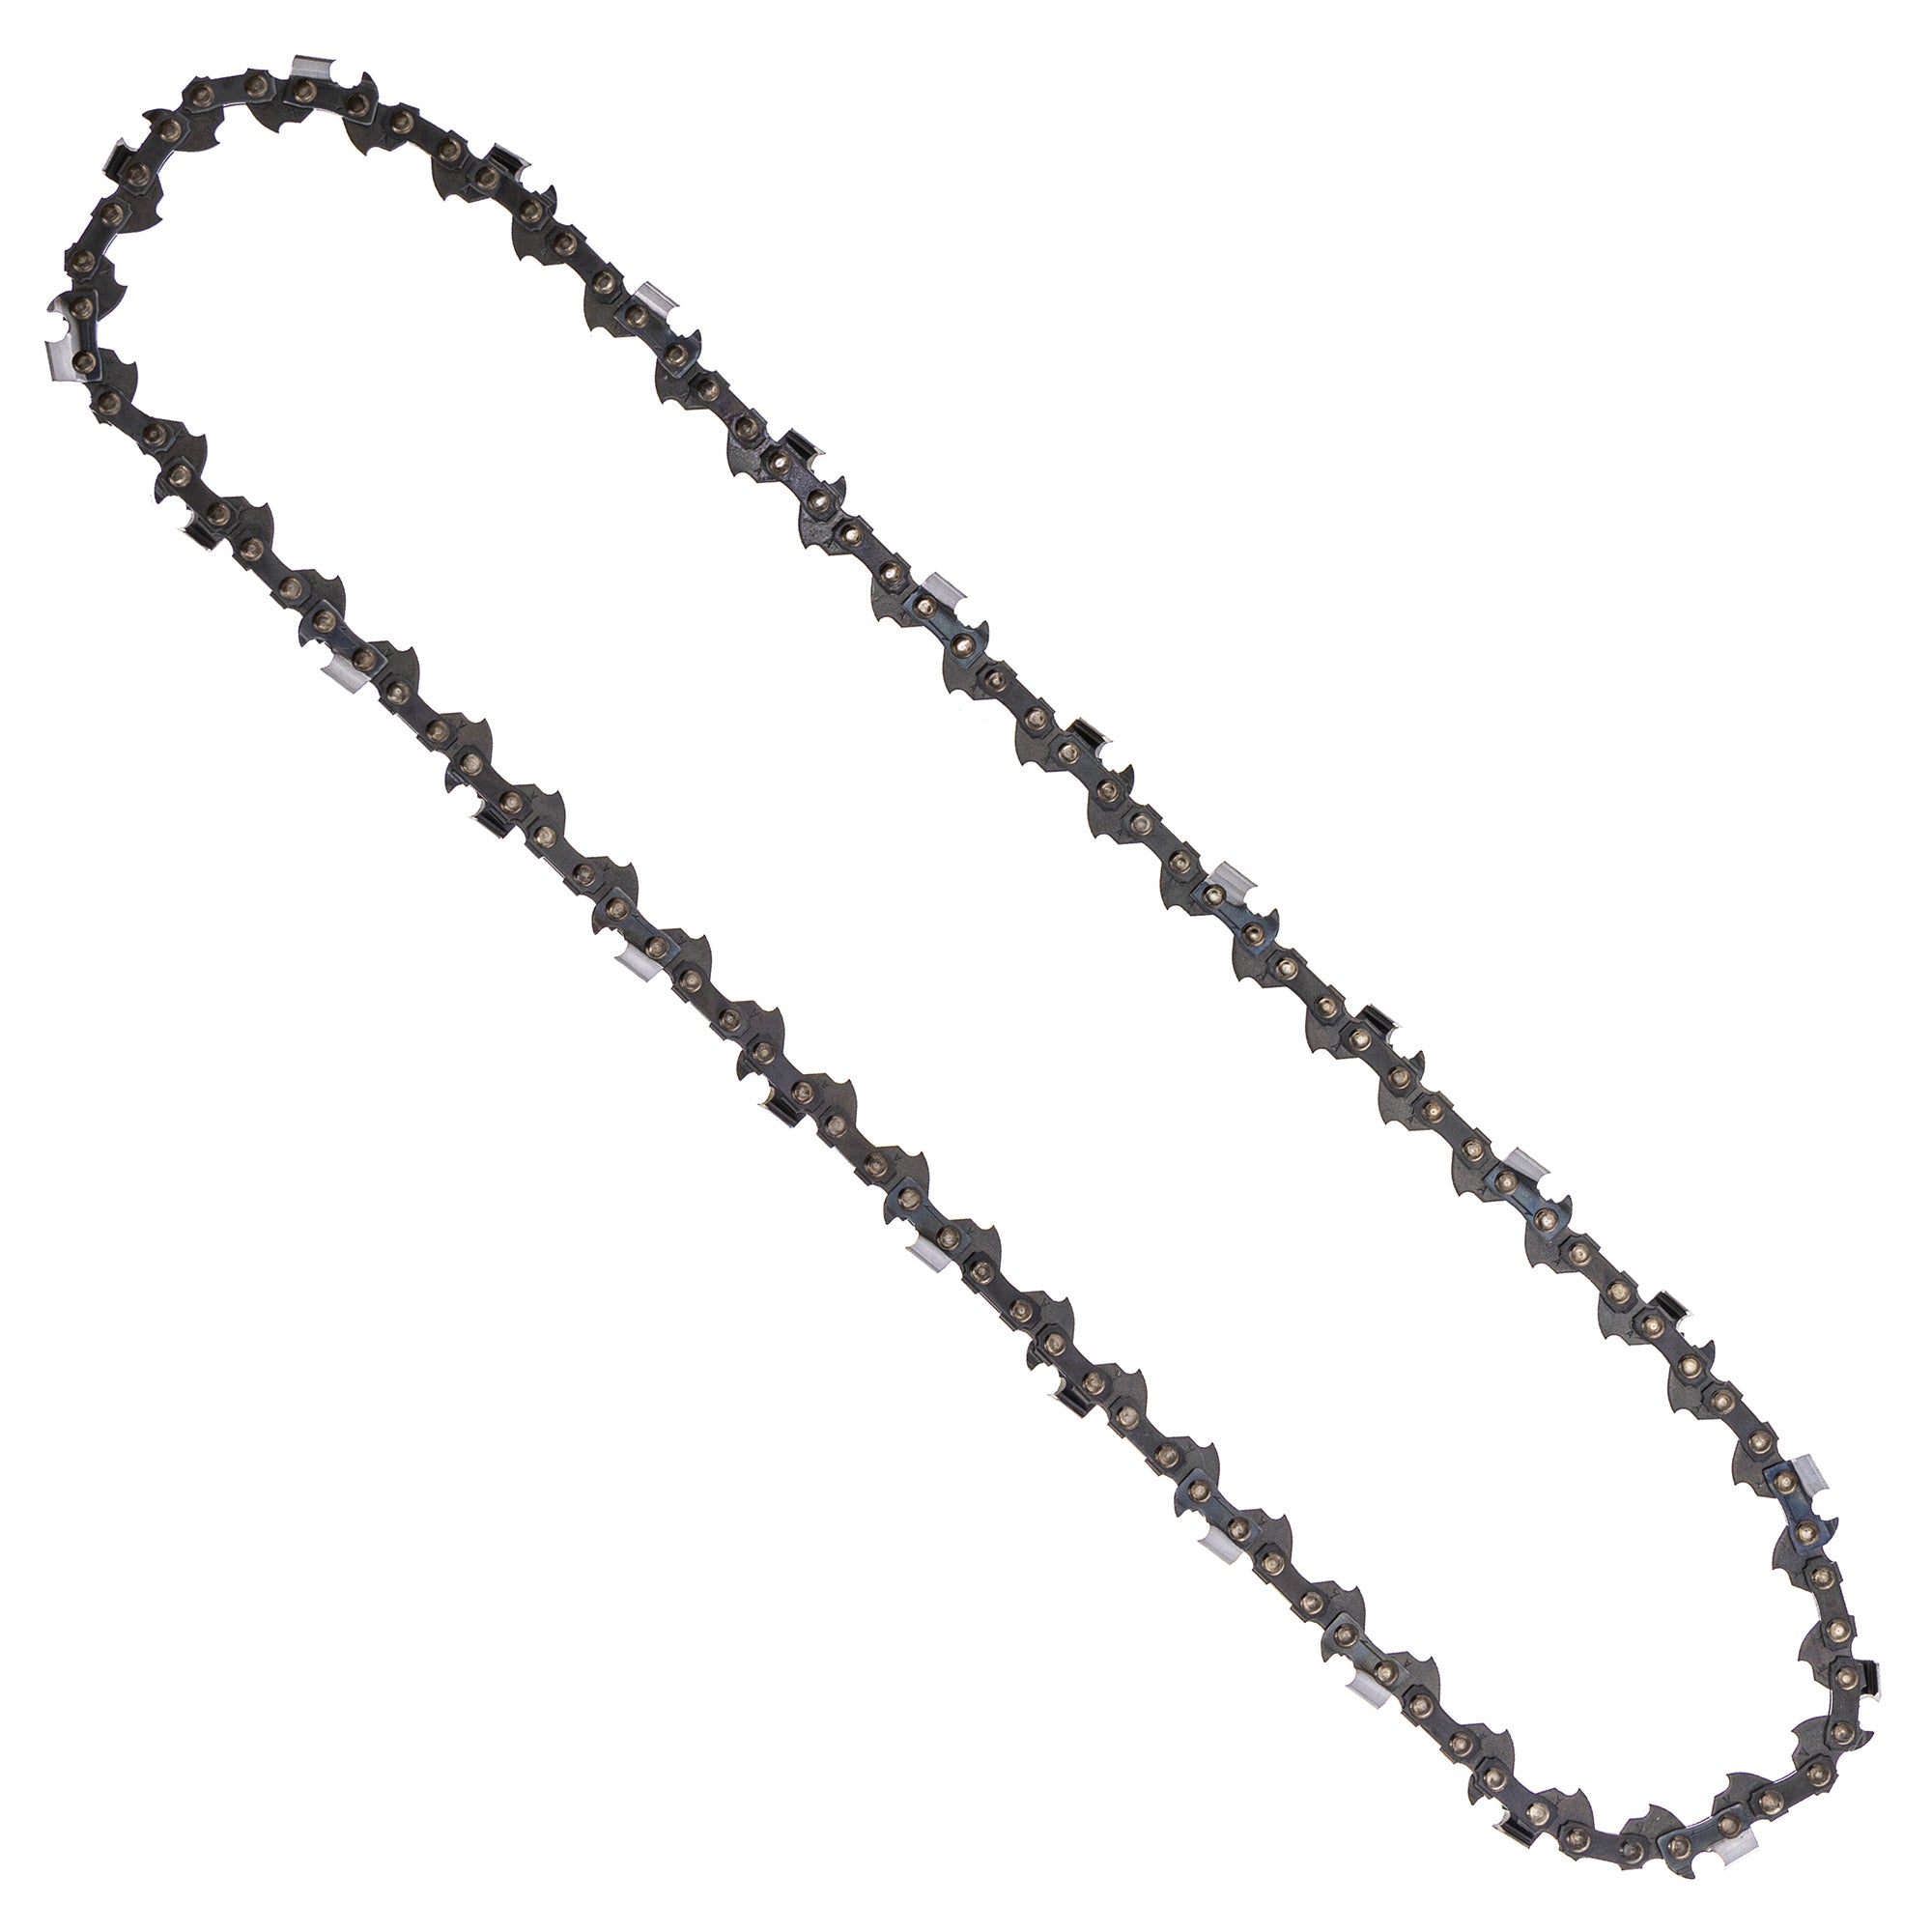 8TEN 810-CCC2234H Chain 2-Pack for zOTHER Stens Oregon Husqvarna